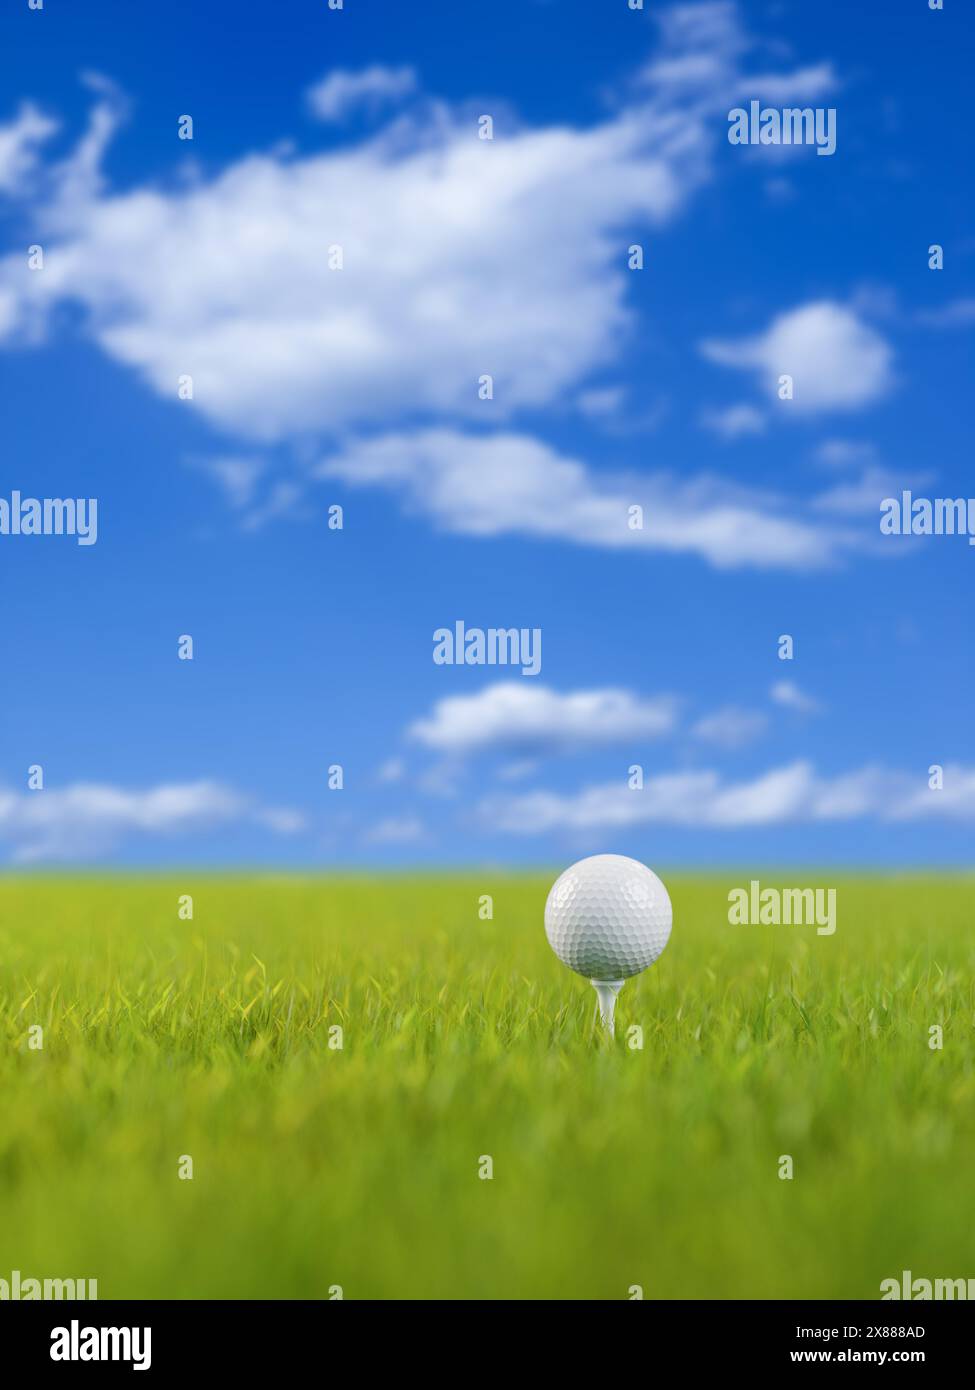 A golf ball on a golf tee on a lawn. Selective focus - very shallow depth of field. Blue sky with clouds background. Stock Photo